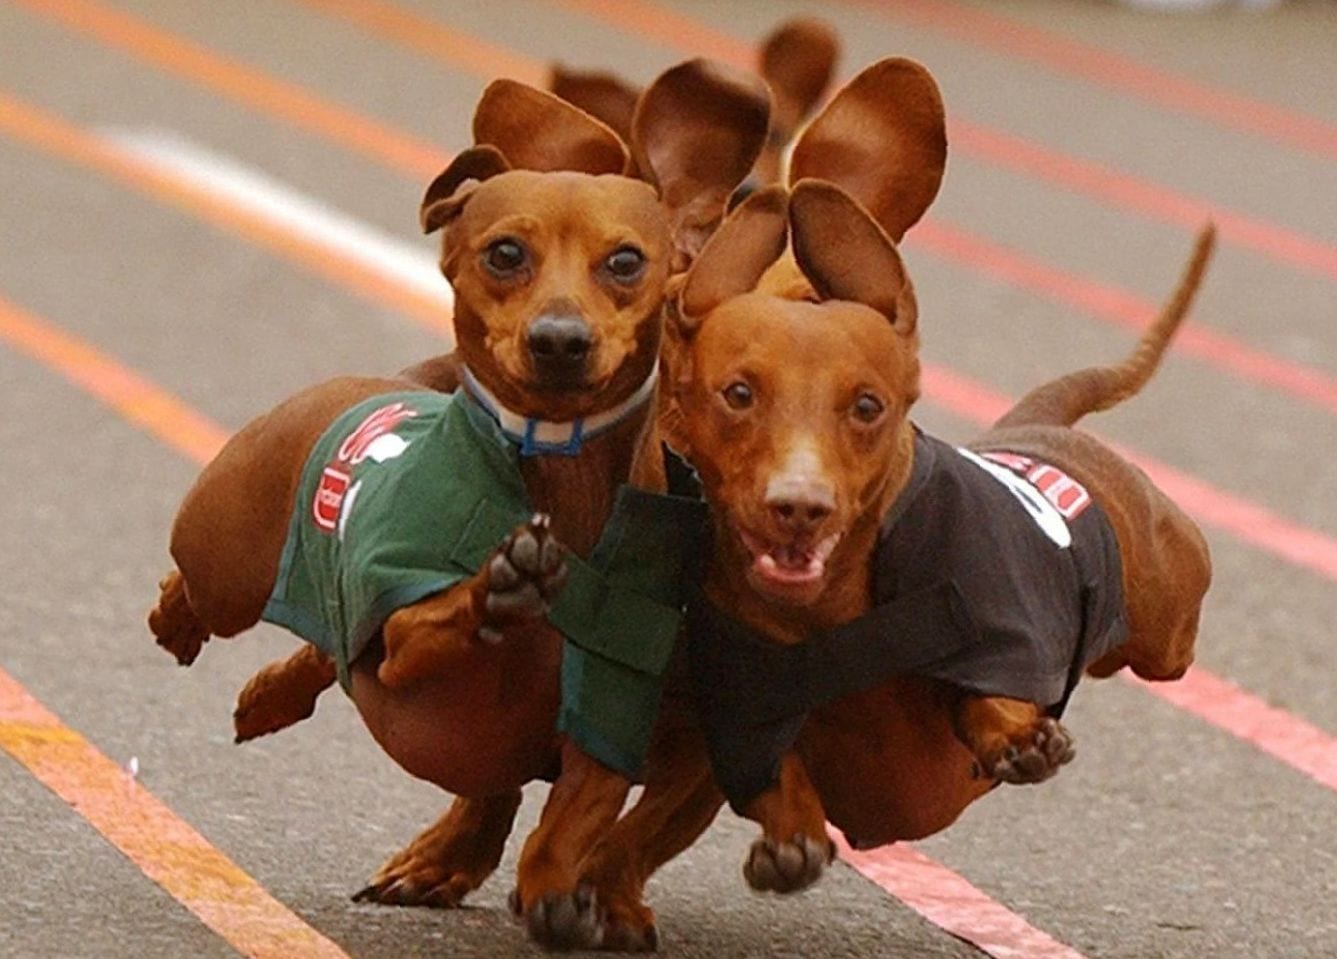 Dachshund running beside each other in a race